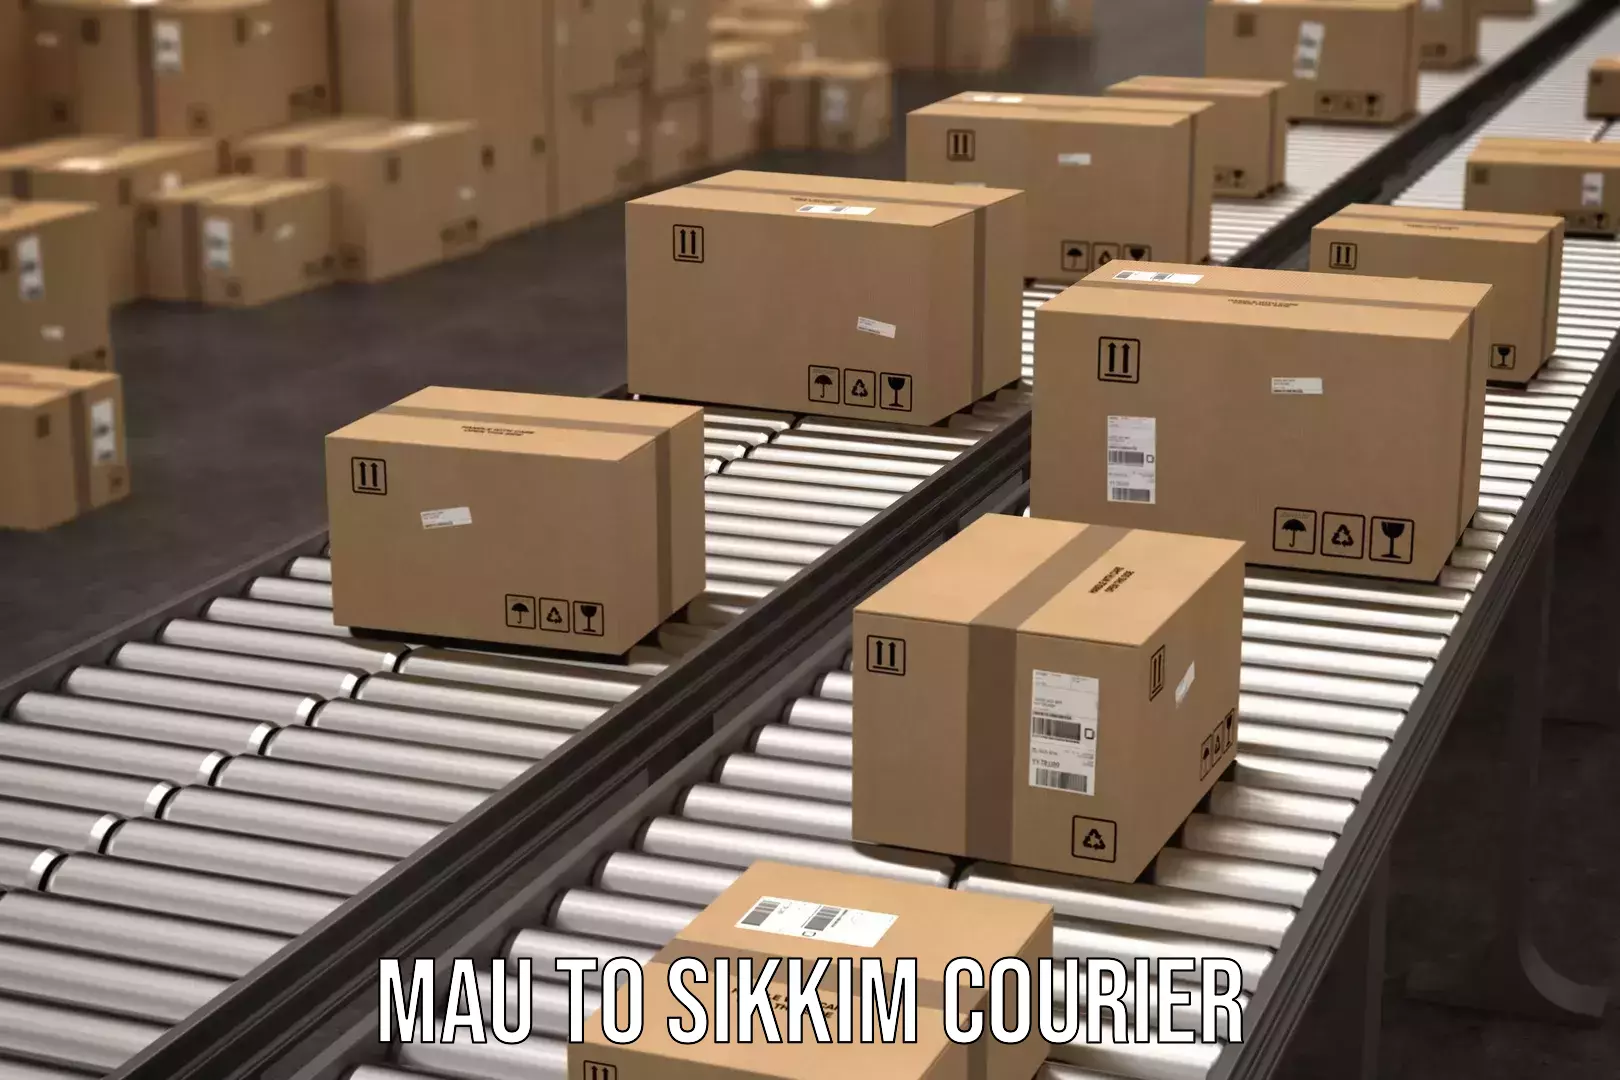 Sustainable shipping practices Mau to Sikkim